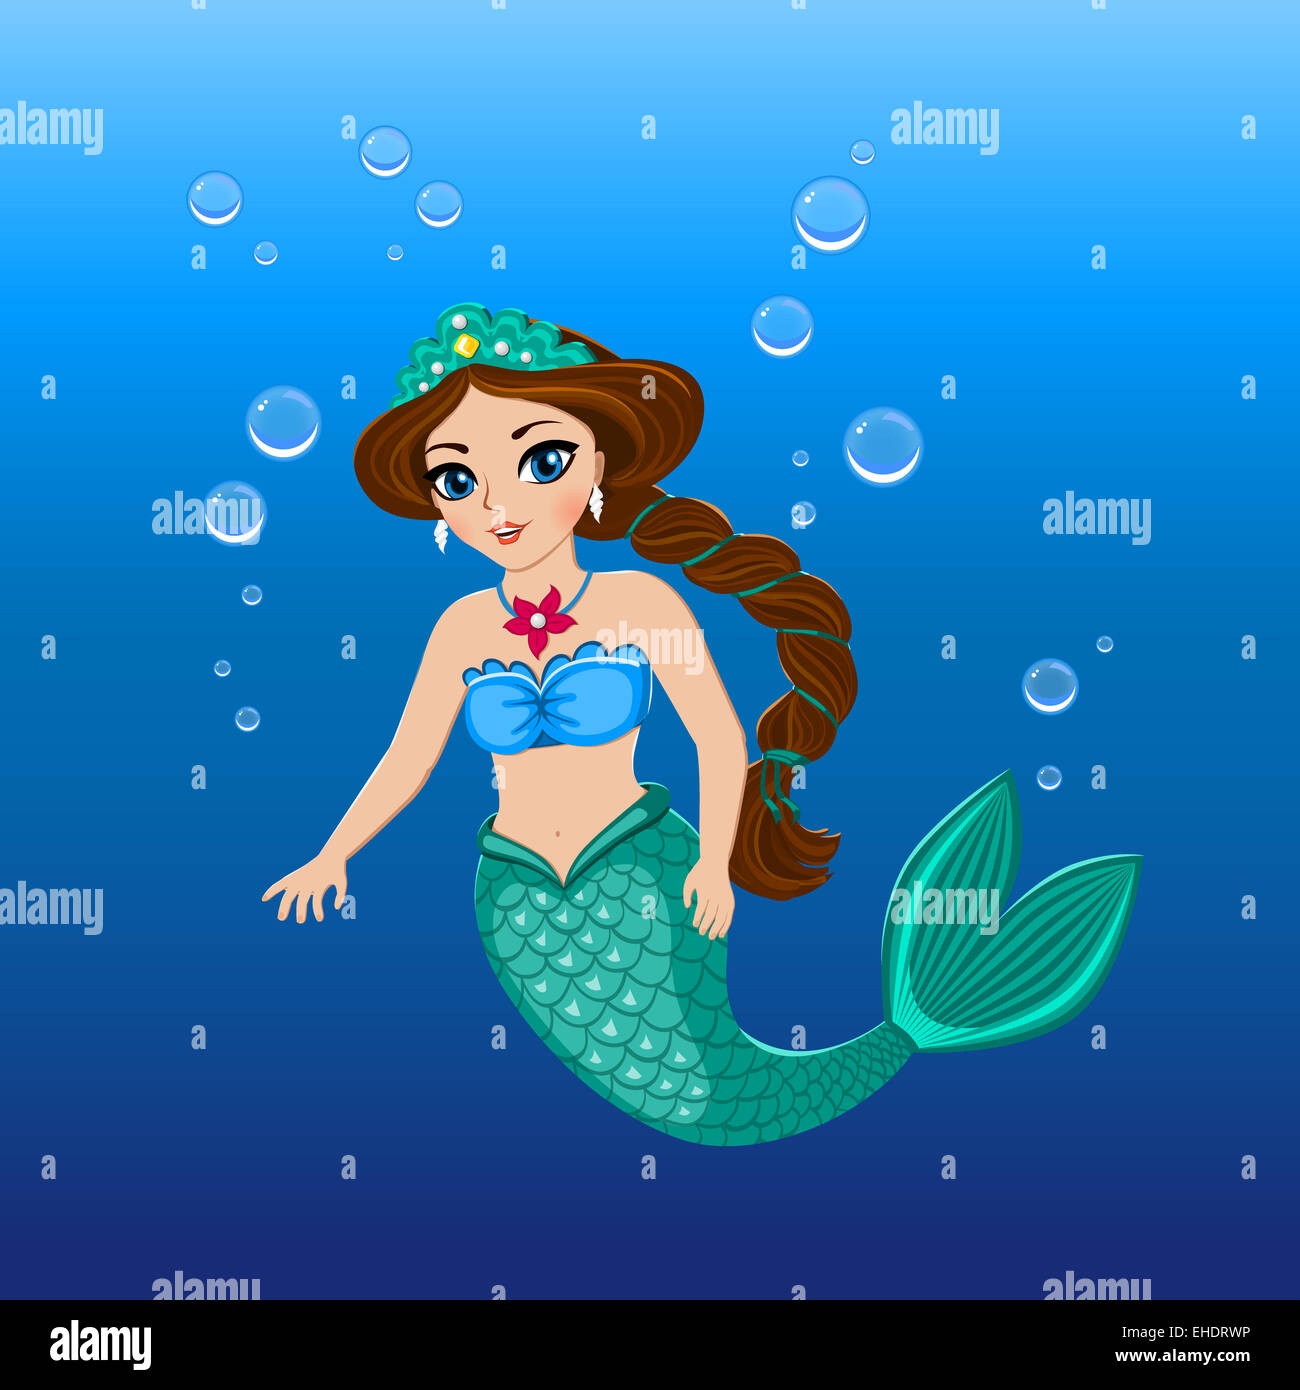 Illustration of a cute mermaid girl under the sea Stock Photo - Alamy